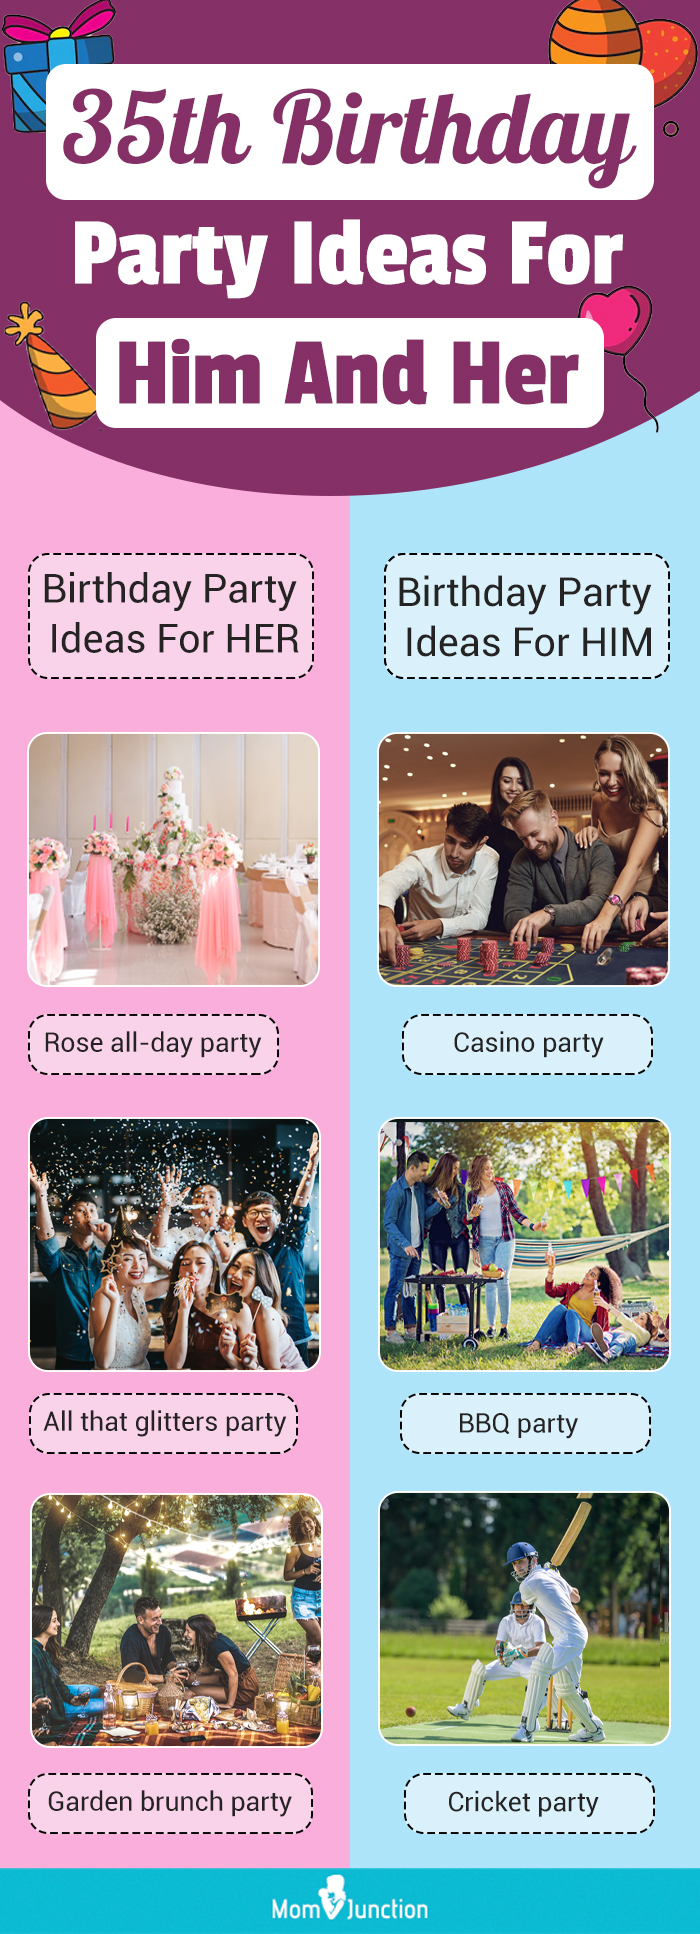 35th birthday party ideas for him and her (infographic)